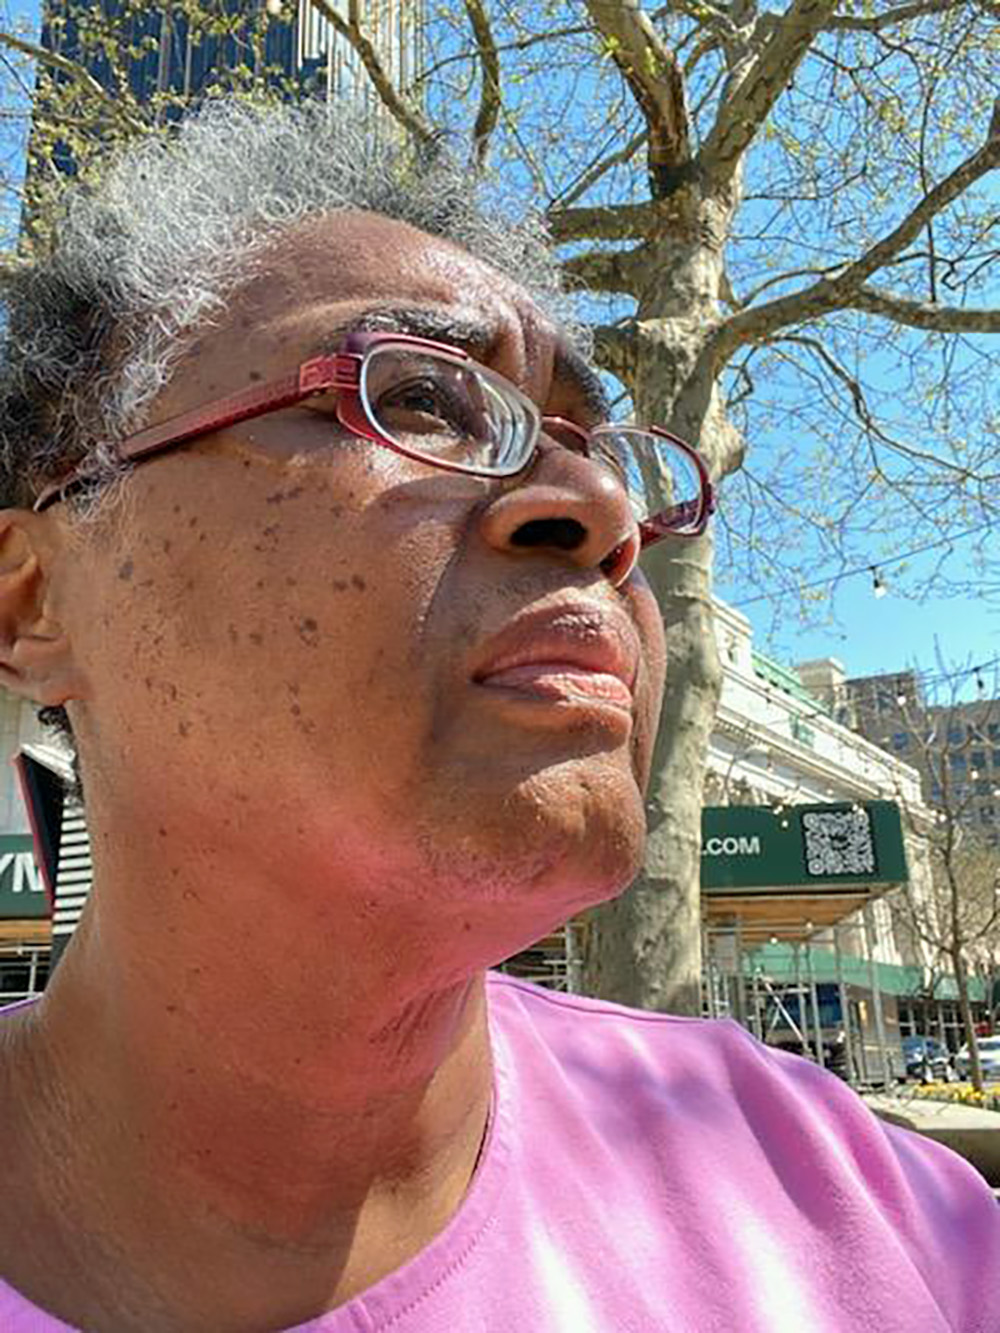 Adrienne Gantt staring away from the camera. She is wearing a pink shirt and red glasses.